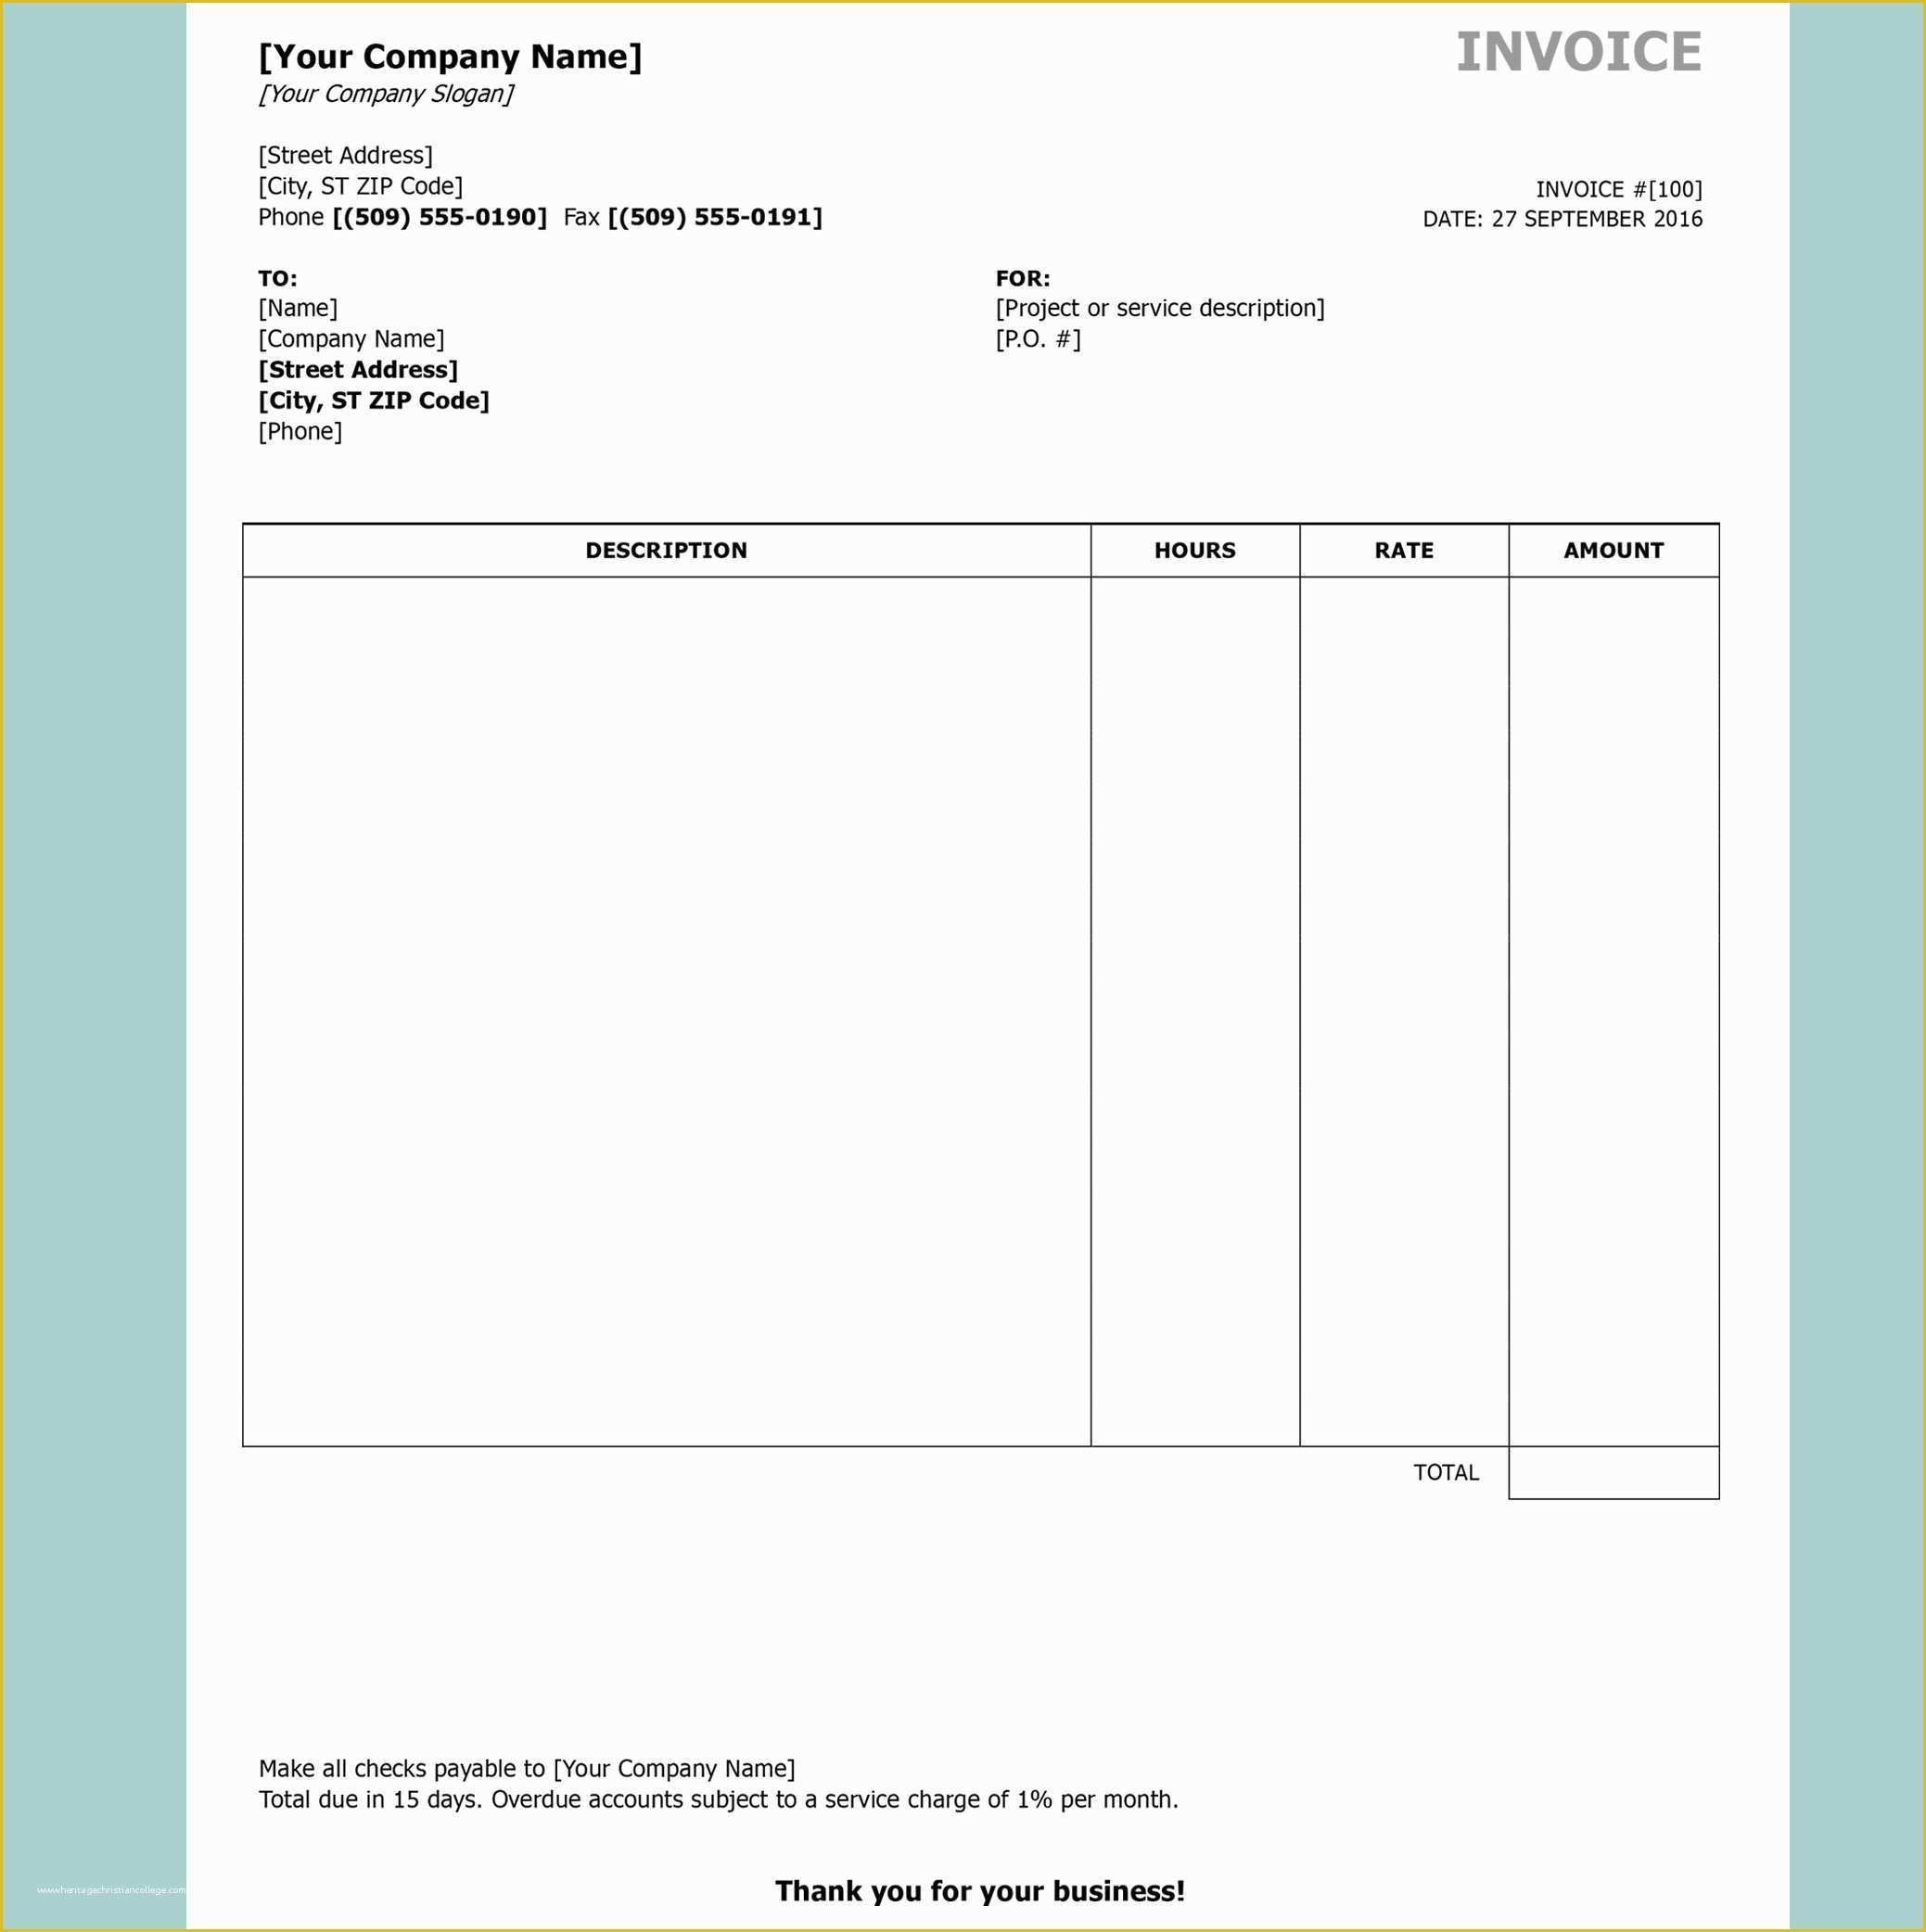 Free Invoice Template Download Of Free Invoice Templates by Invoiceberry the Grid System